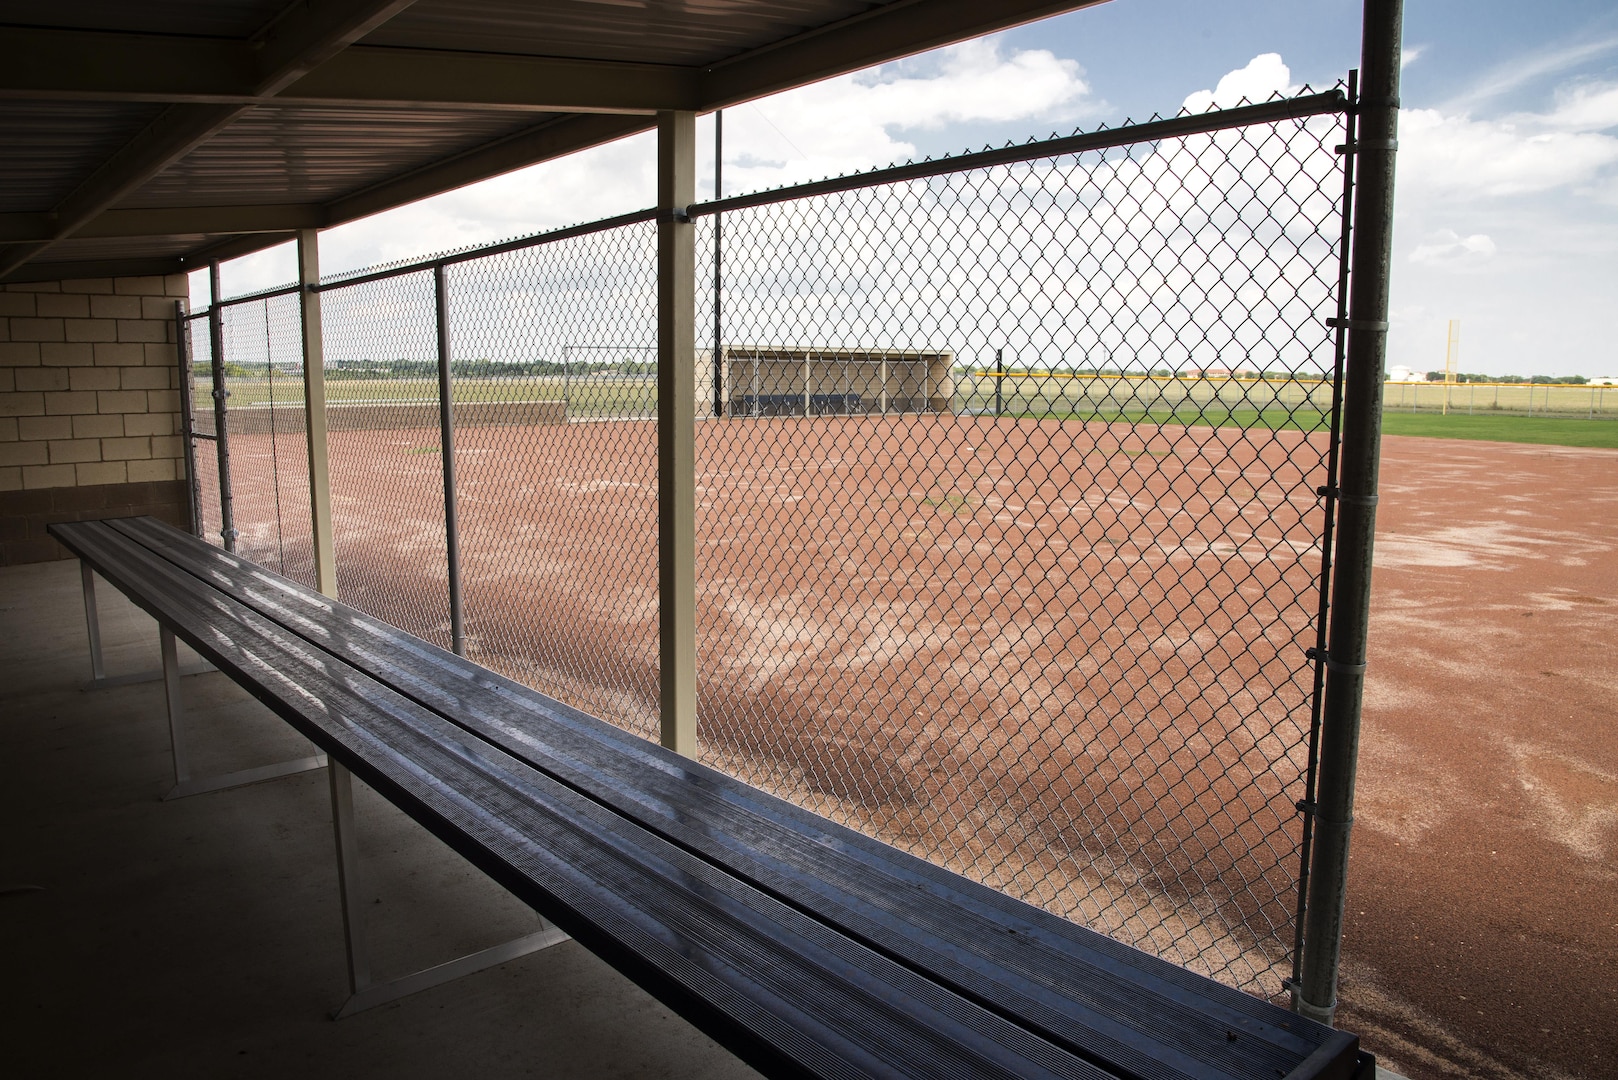 The dugout at the new softball field at Randolph High School August 8, 2017, at Joint Base San Antonio, Randolph, Texas.  A softball and baseball field have been built to support the Randolph HS athletics department.  (U.S. Air Force photo by Sean M. Worrell)